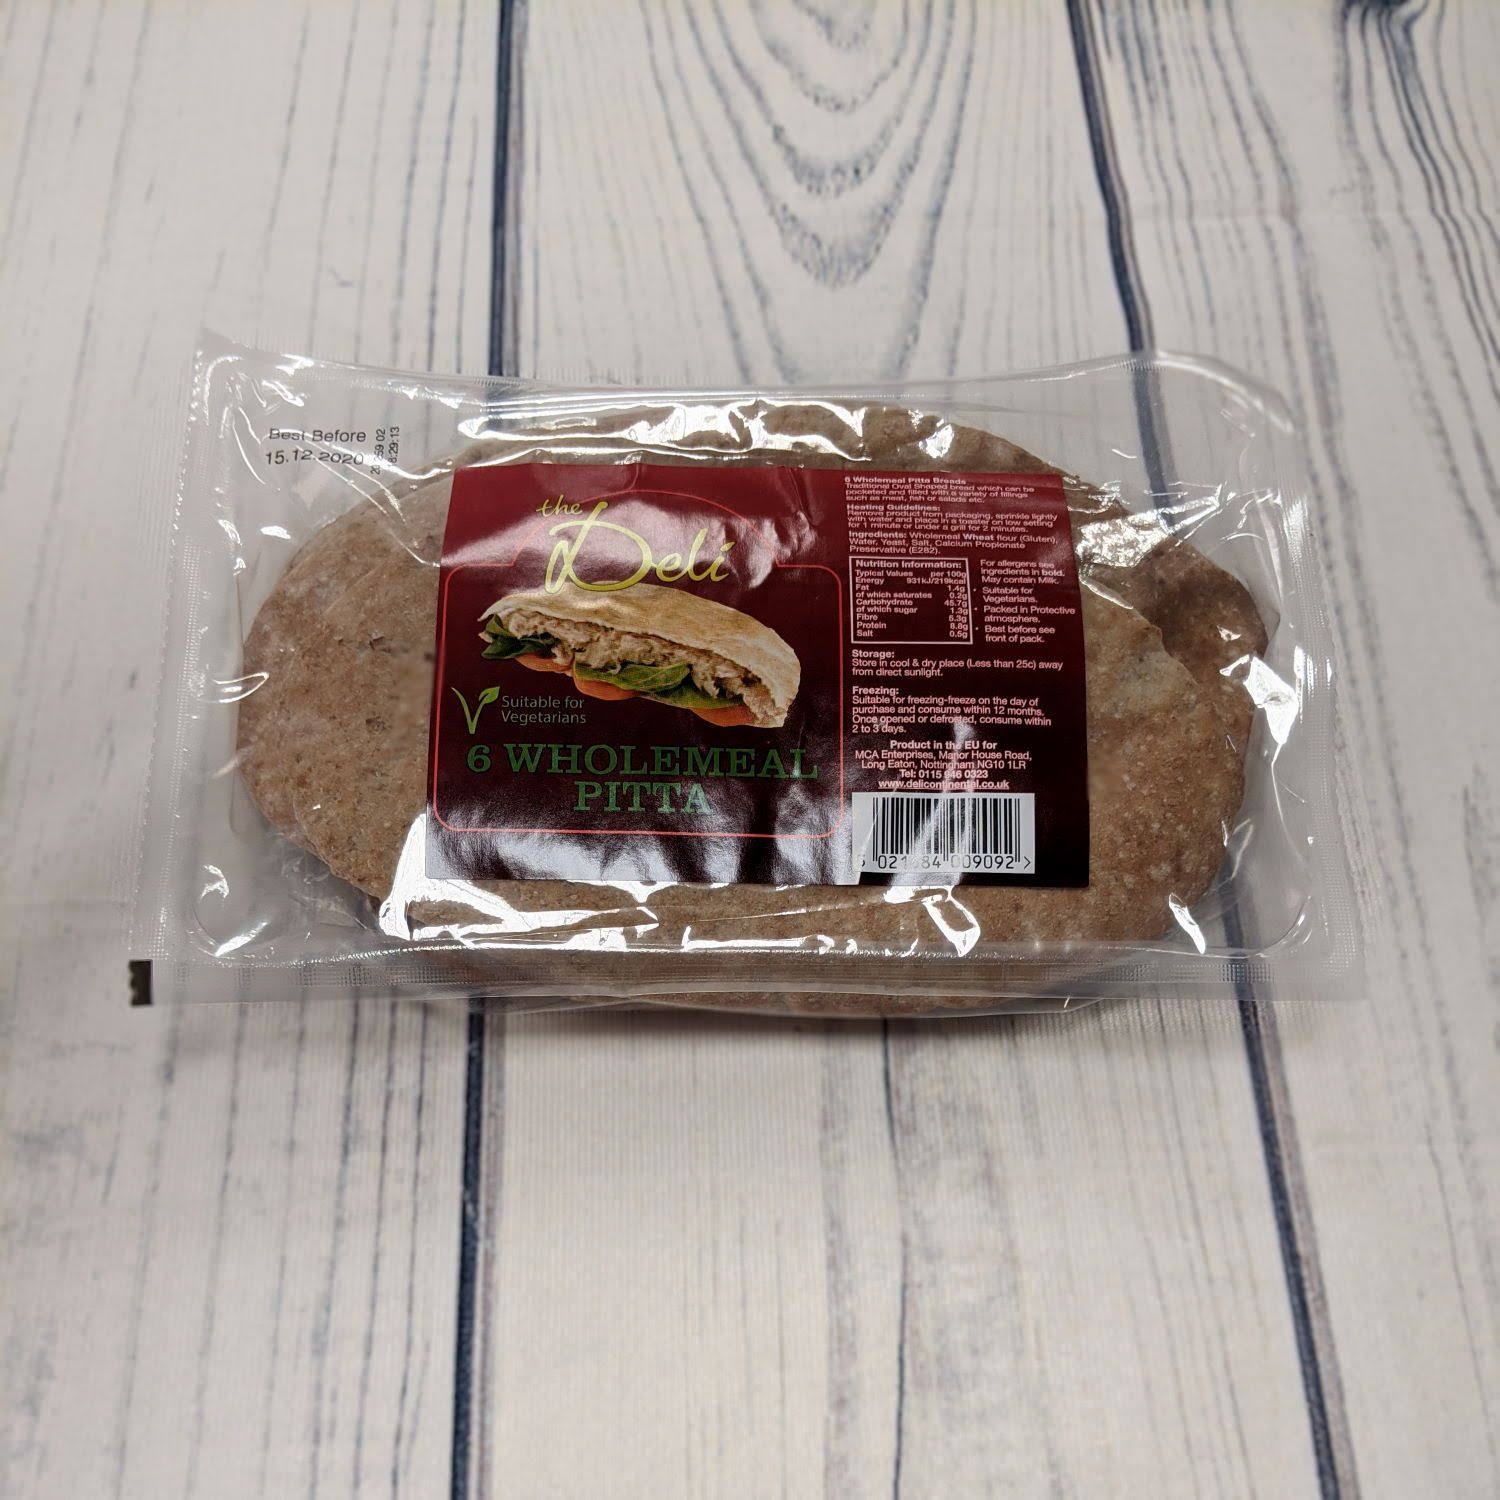 The Deli Wholemeal Pitta 6 Pack